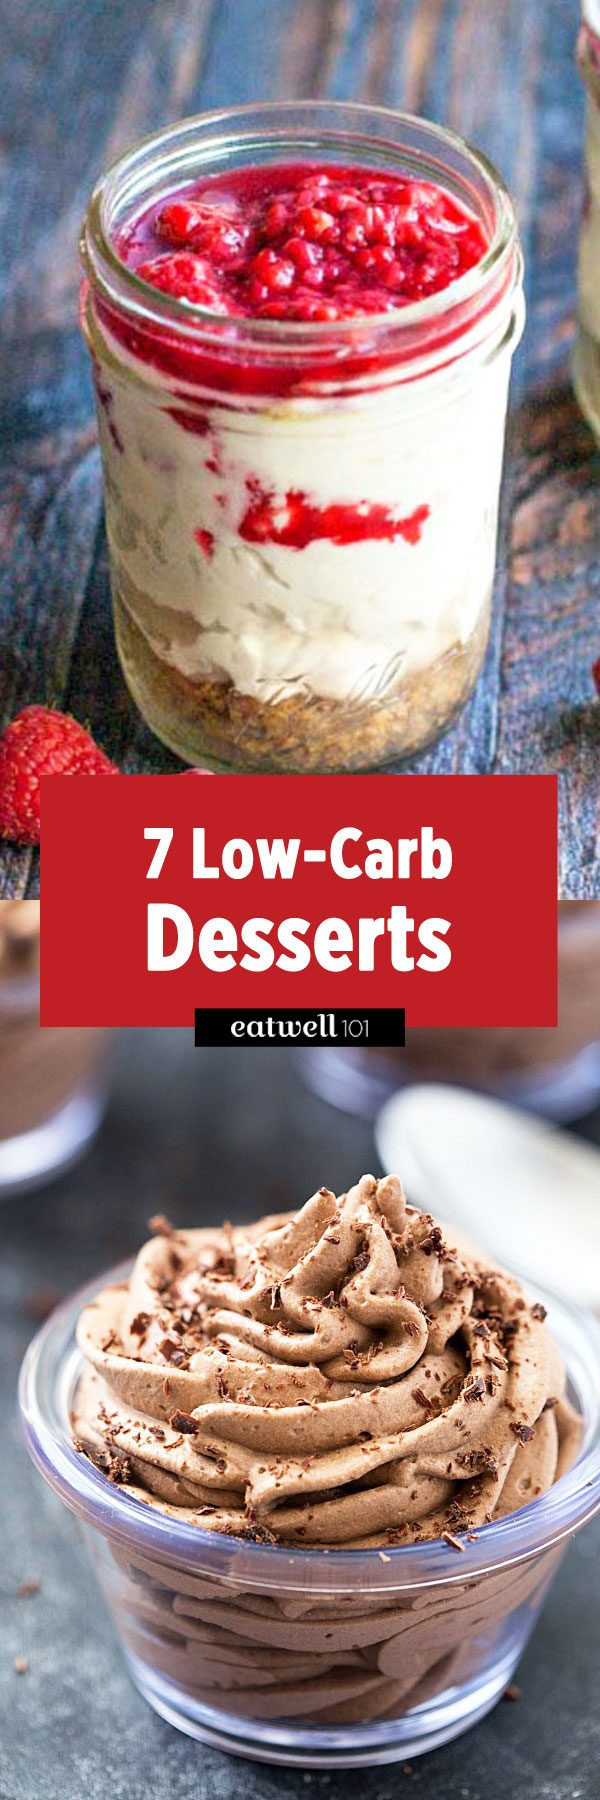 Low Carb Holiday Recipes
 Your Christmas Dessert Needs These Low Carb Treats